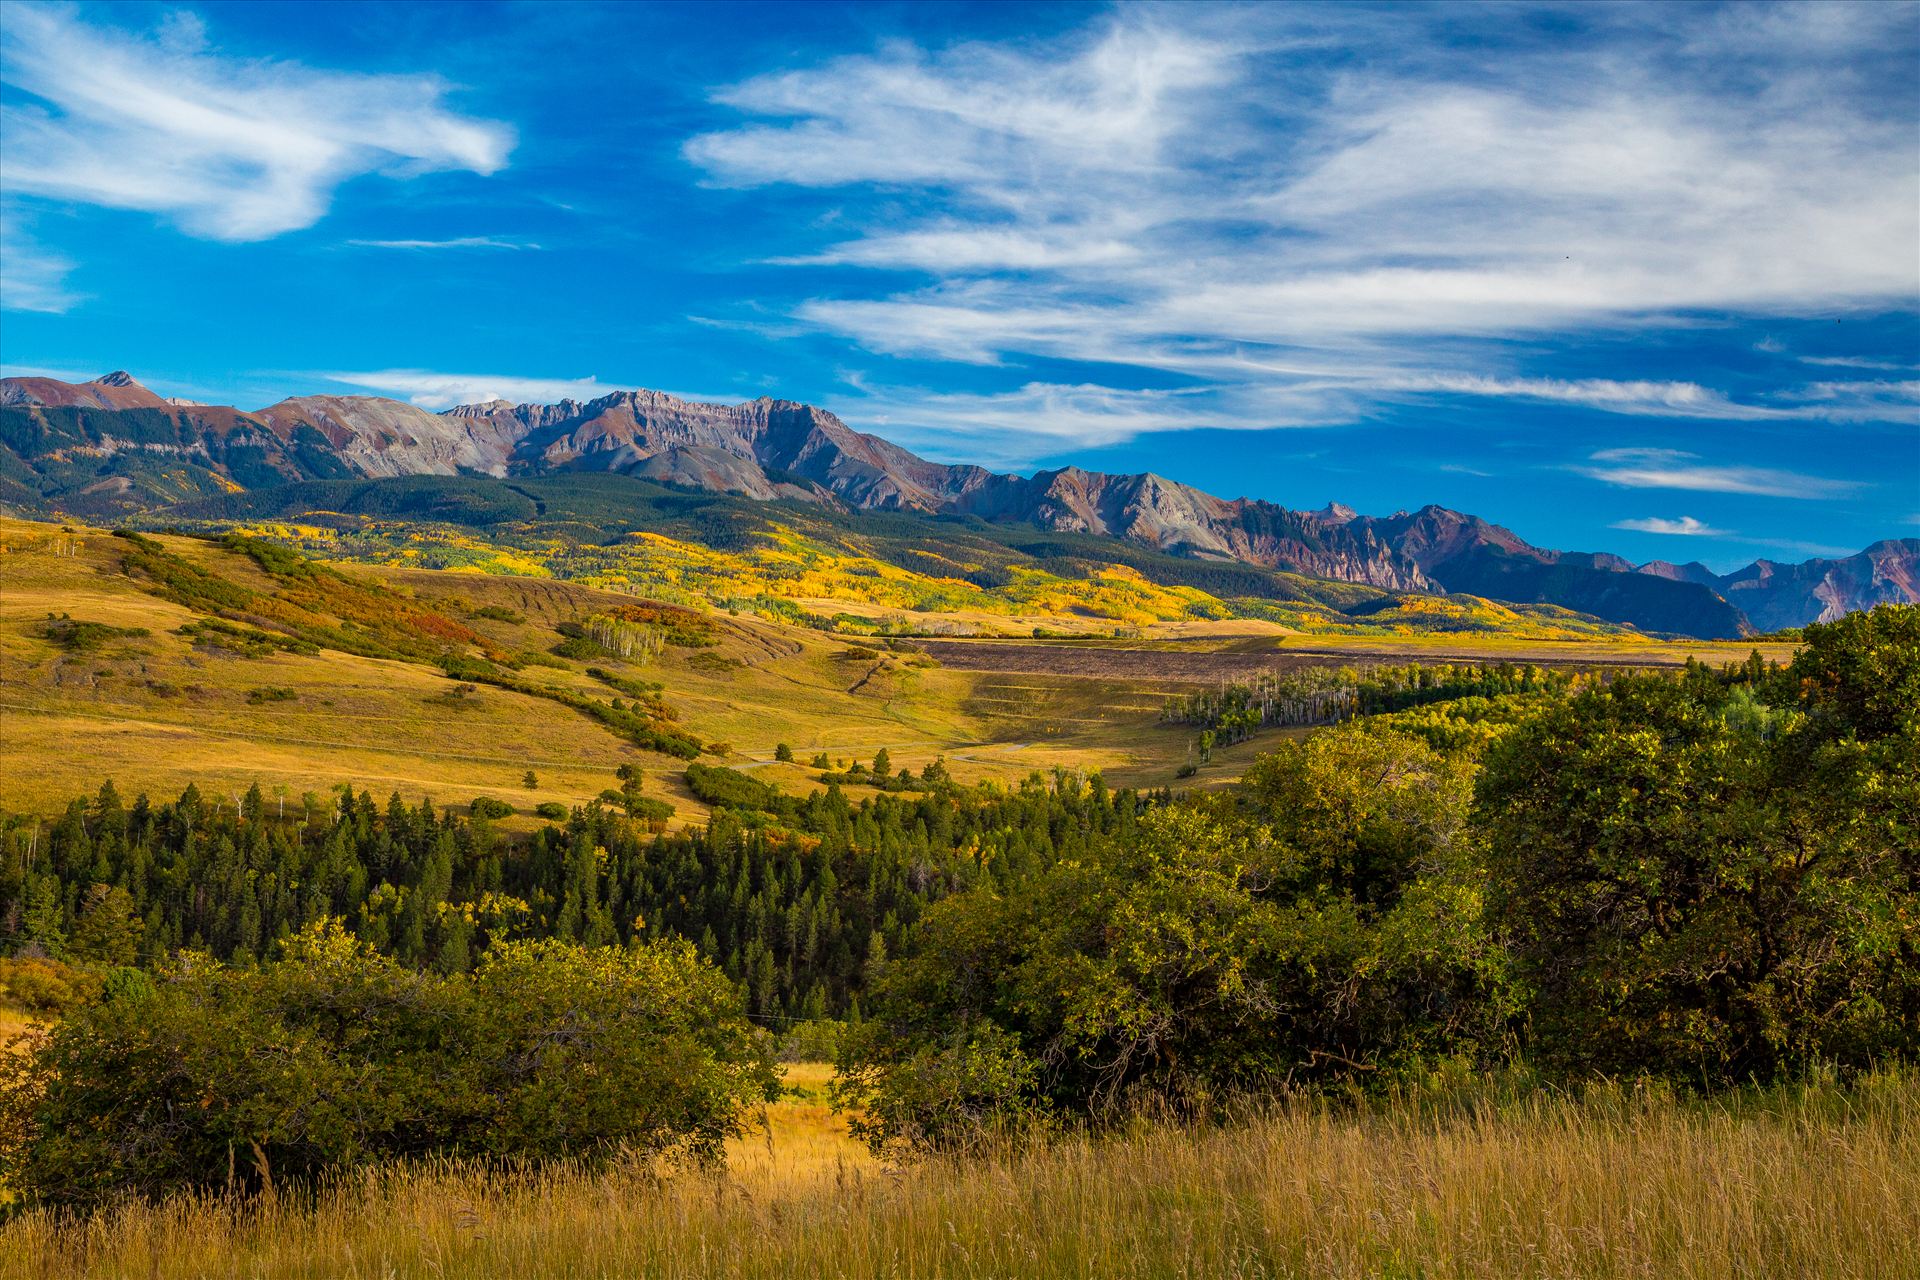 Last Dollar Road 2 - From Last Dollar Road looking towards the San Joquin Range, the area around Telluride explodes with fall colors. by Scott Smith Photos